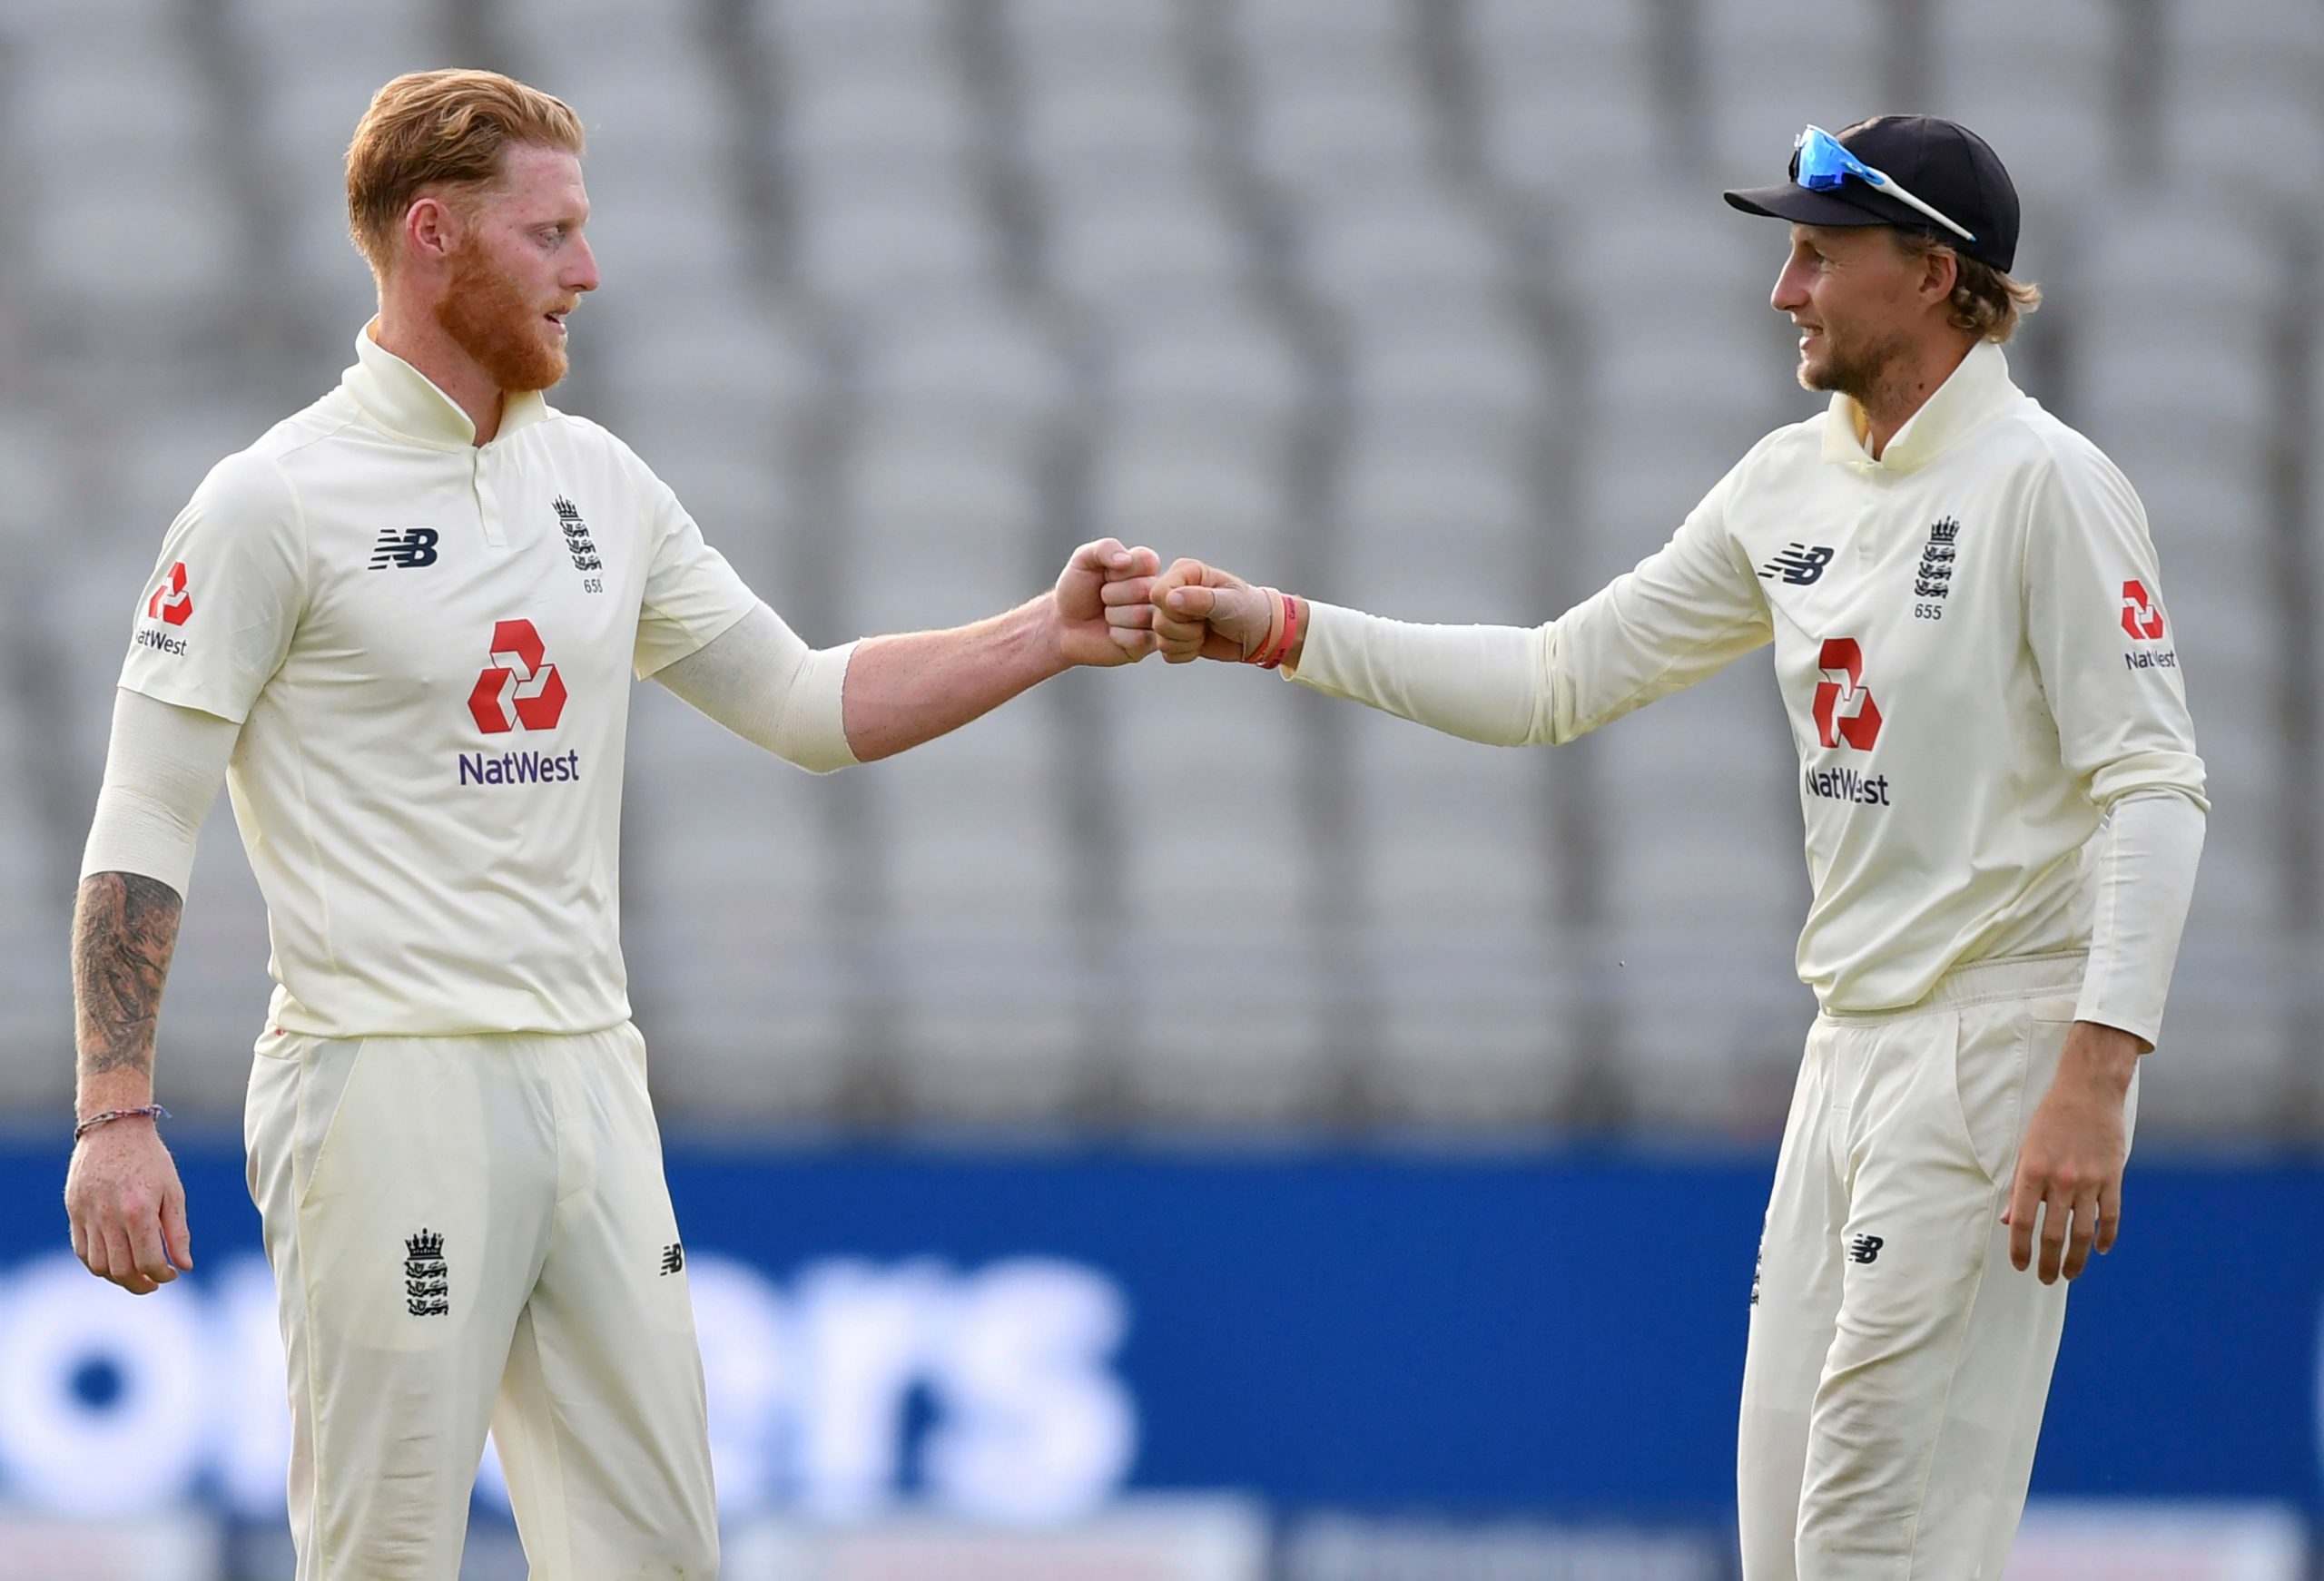 ‘Test batsmen should be able to handle all conditions’: Ben Stokes on India’s spin-friendly pitches